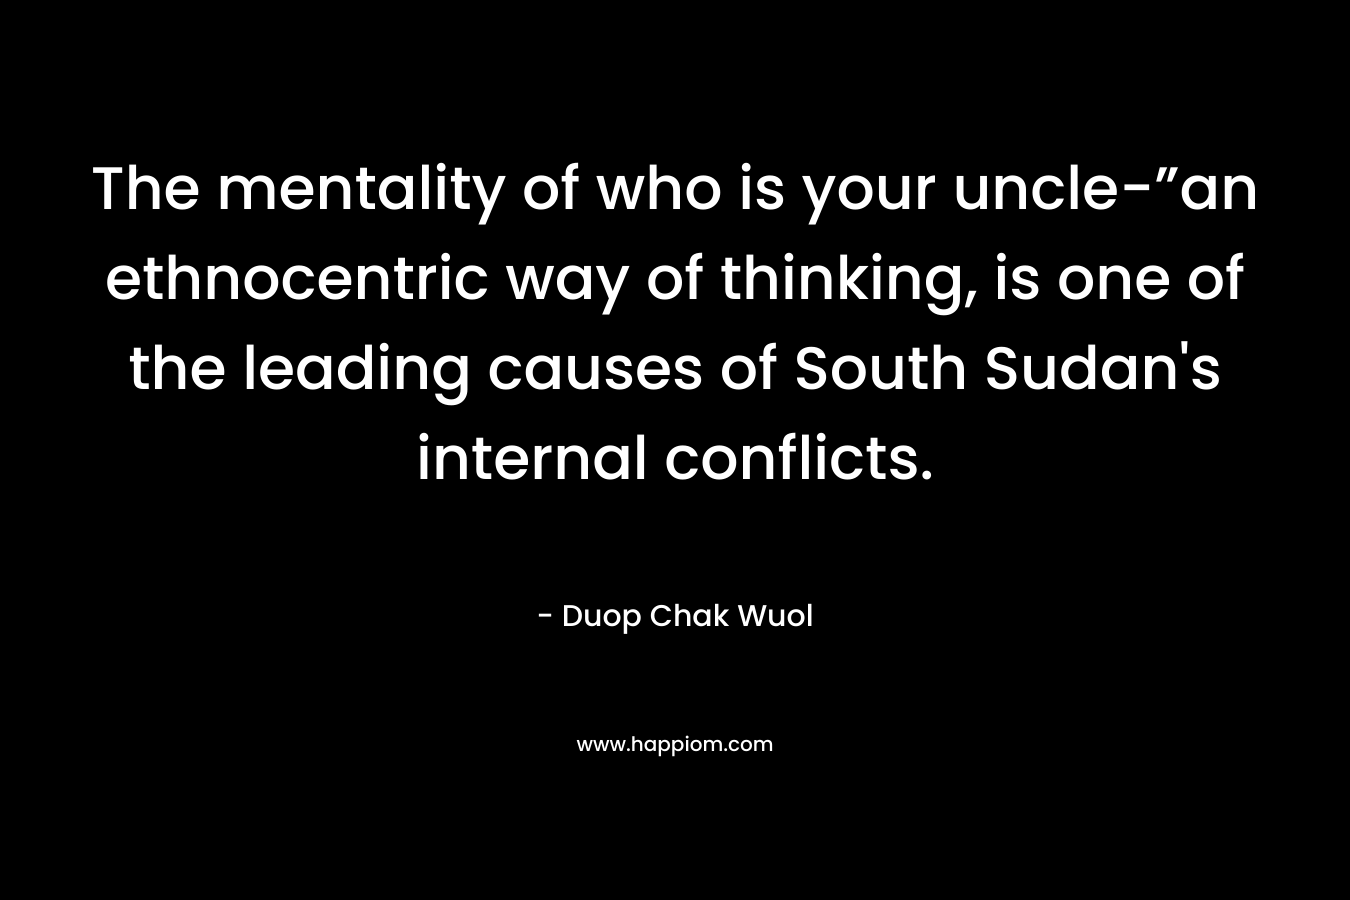 The mentality of who is your uncle-”an ethnocentric way of thinking, is one of the leading causes of South Sudan's internal conflicts.